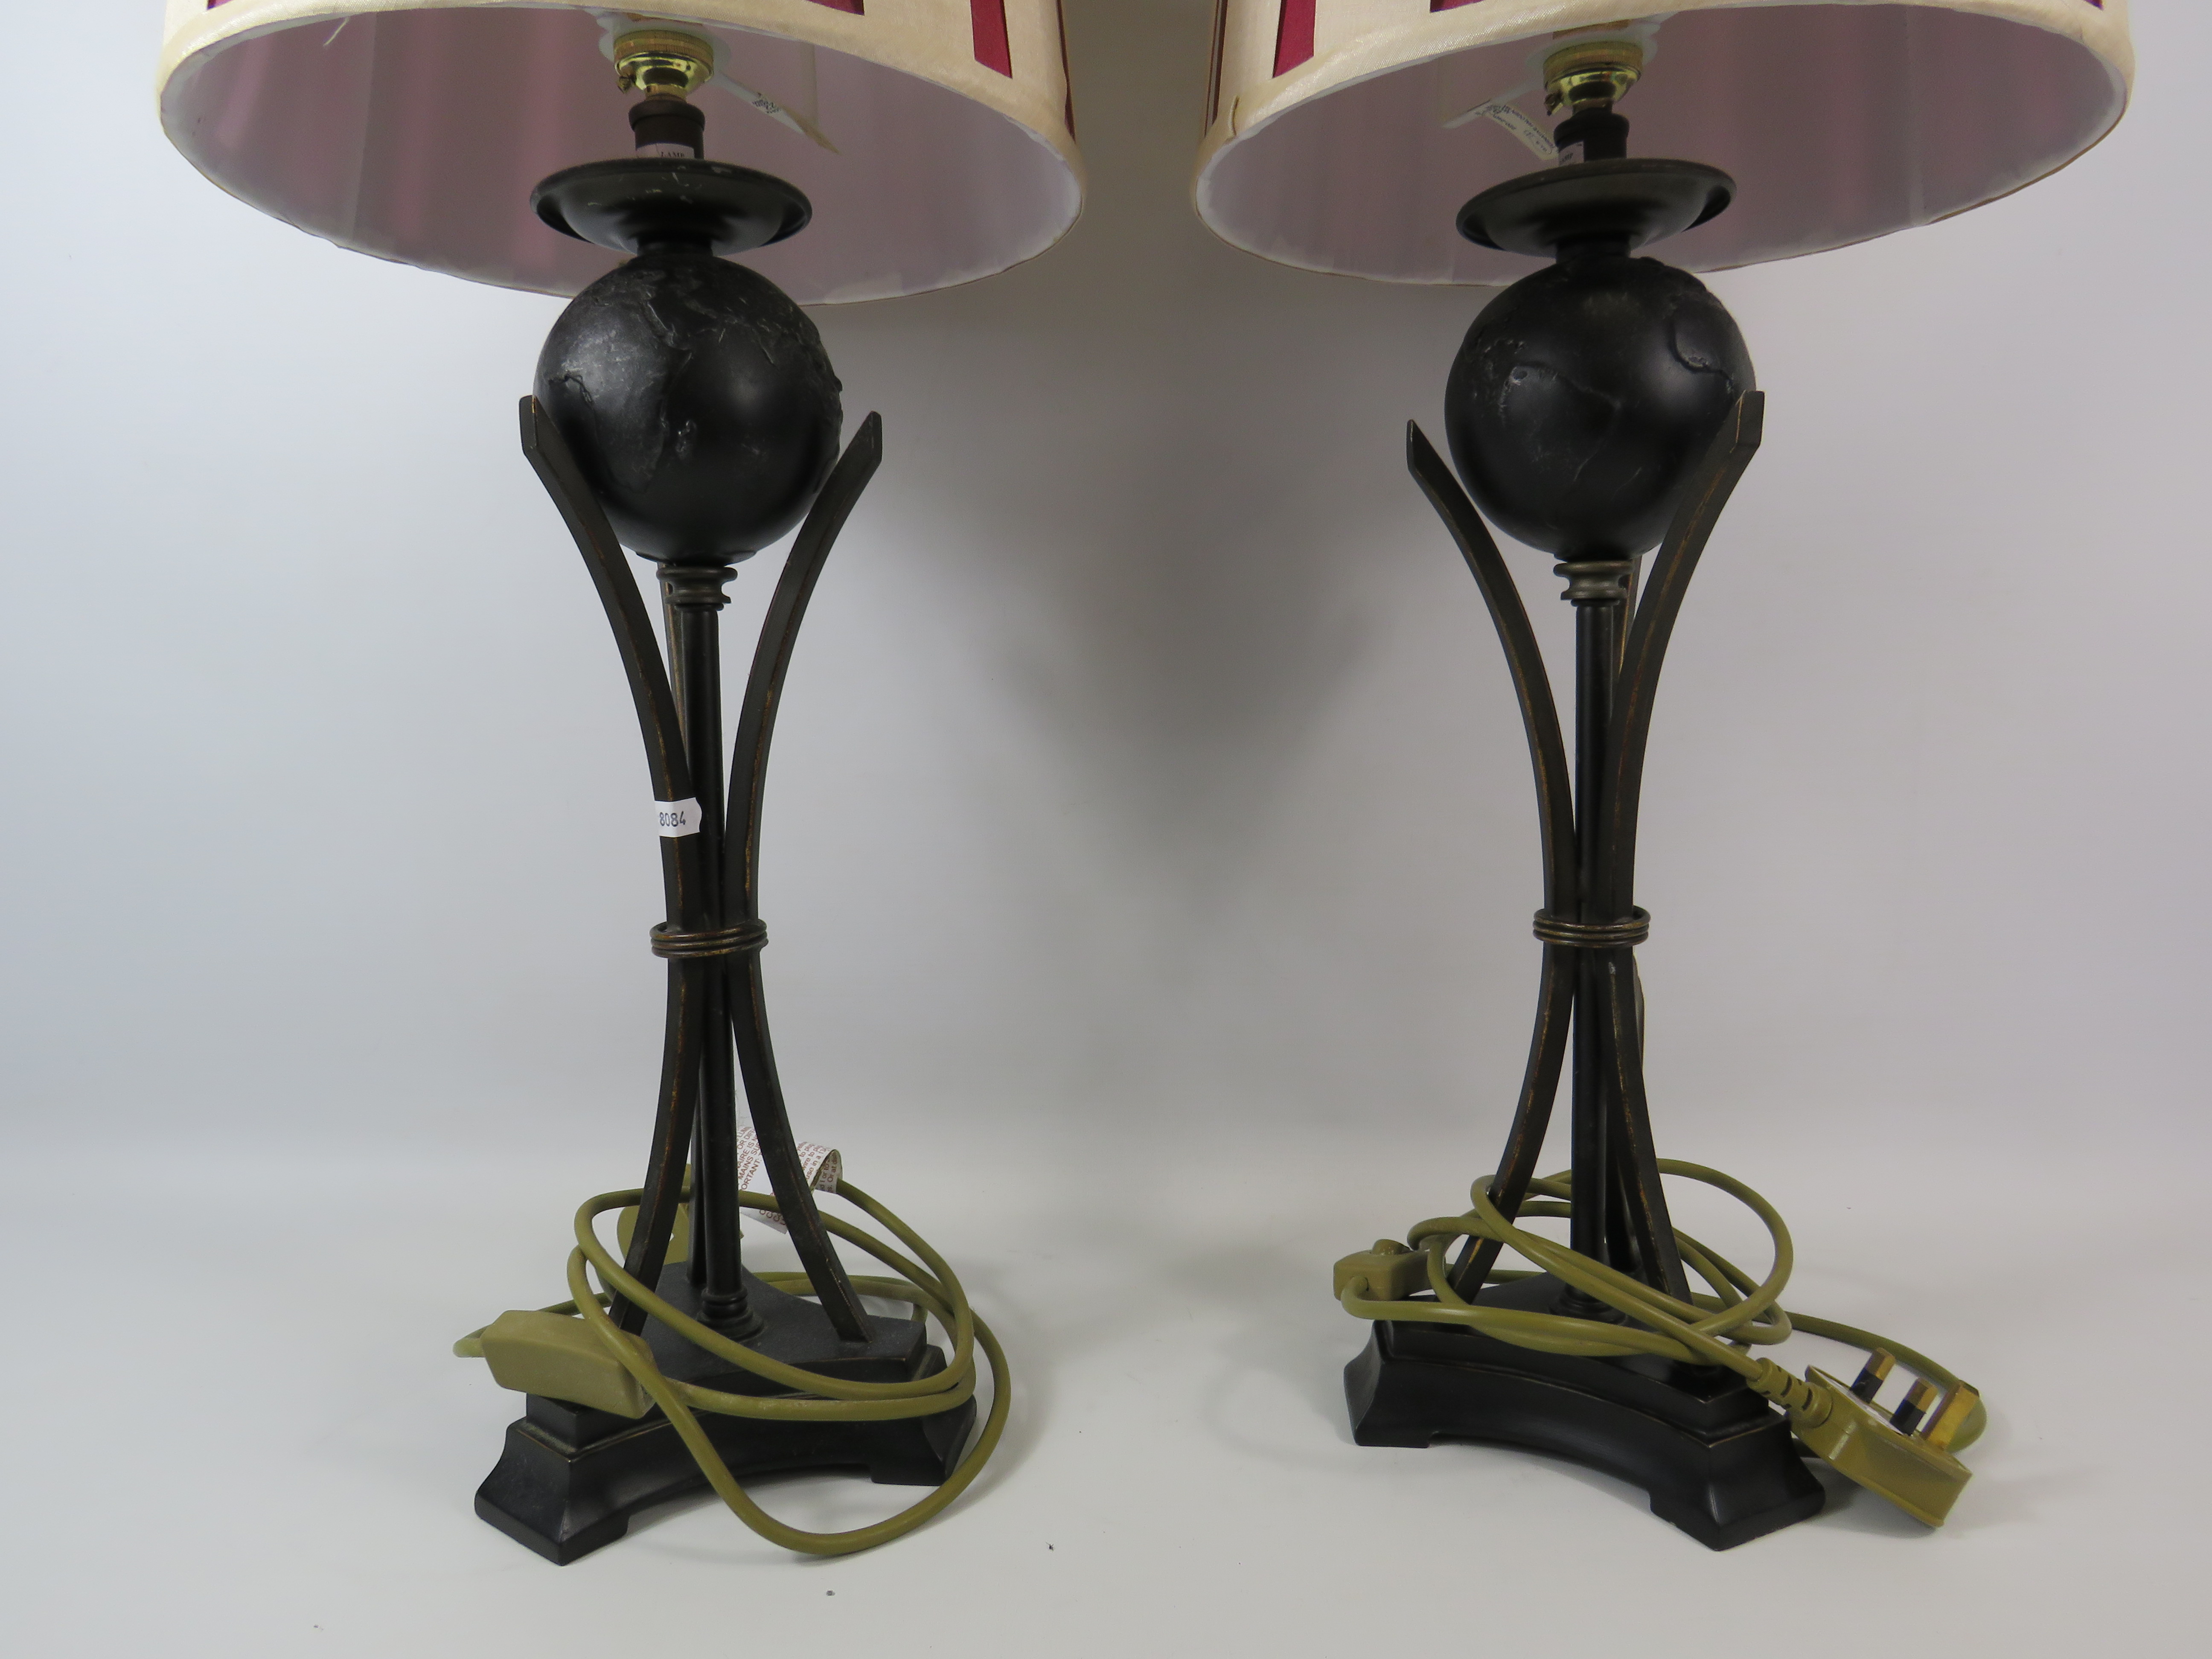 Pair of Globe table lamps, approx 20" tall to the top of the light fitting. - Image 2 of 3